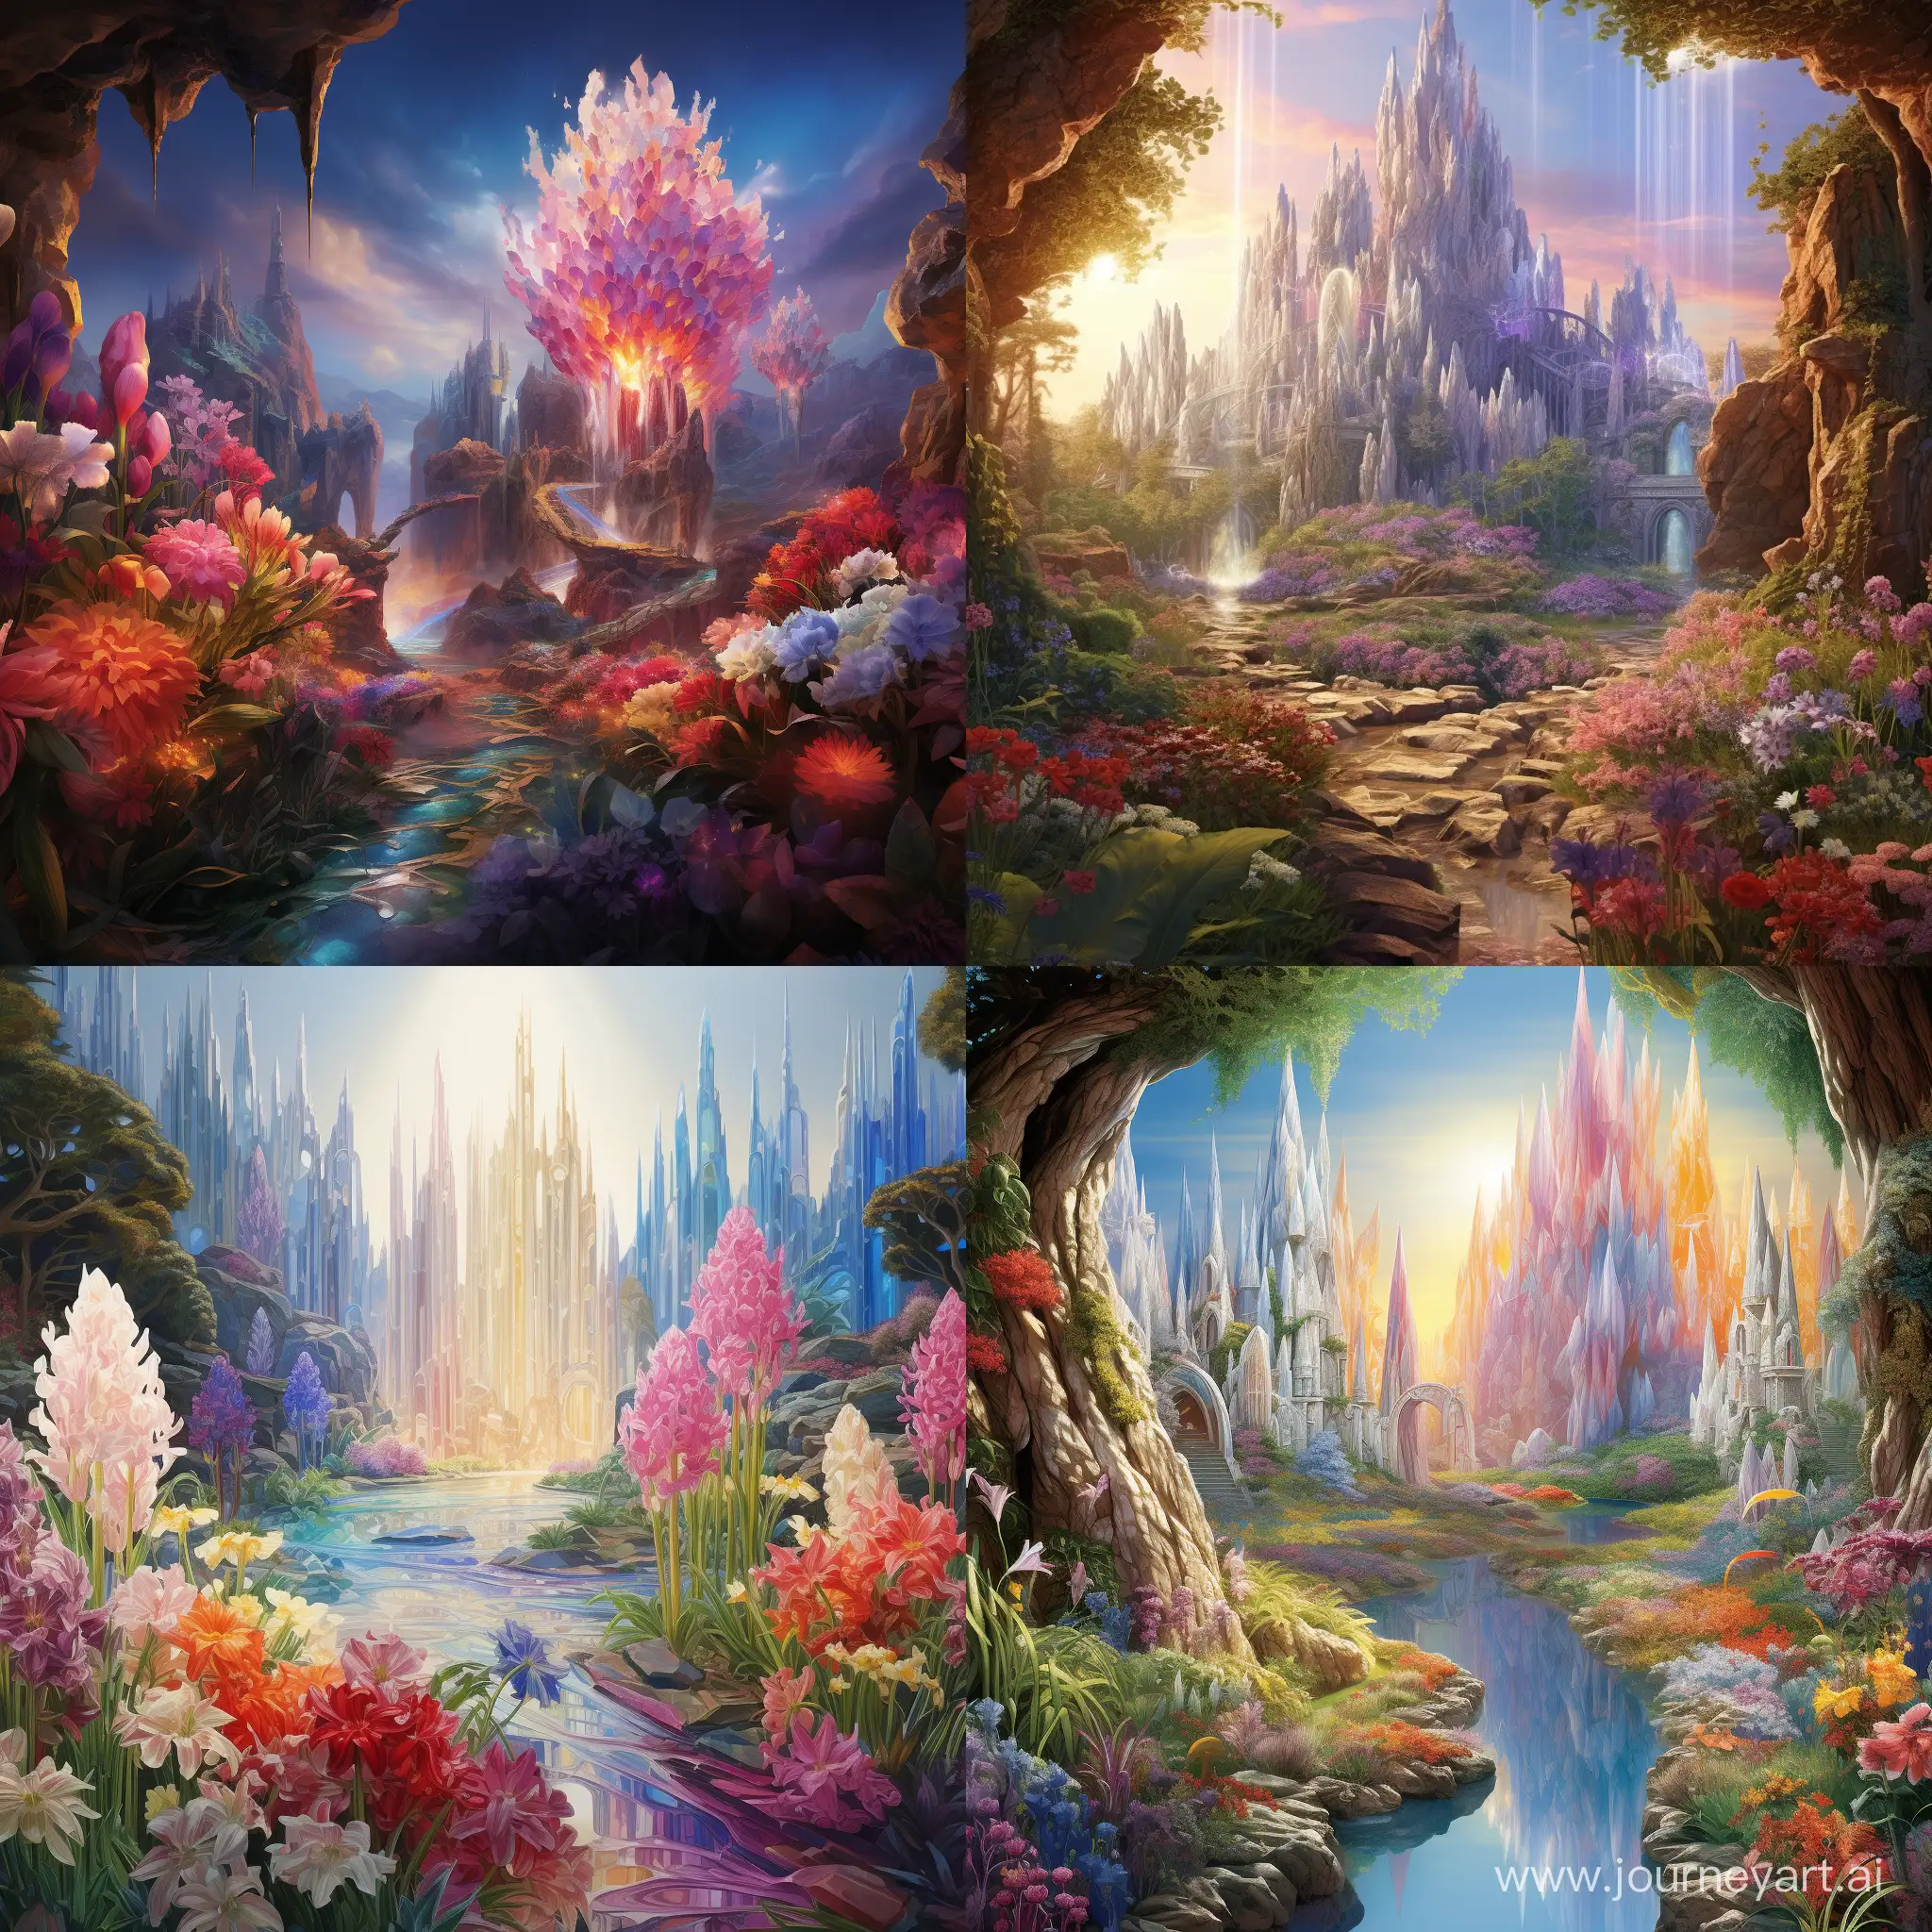 Imagine a landscape adorned with towering crystal formations that refract sunlight into a dazzling array of colors, casting iridescent hues across the entire landscape. The gardens are filled with vibrant, luminous flora that pulsate softly, emitting a gentle glow that dances harmoniously with the soft whispers of the breeze.